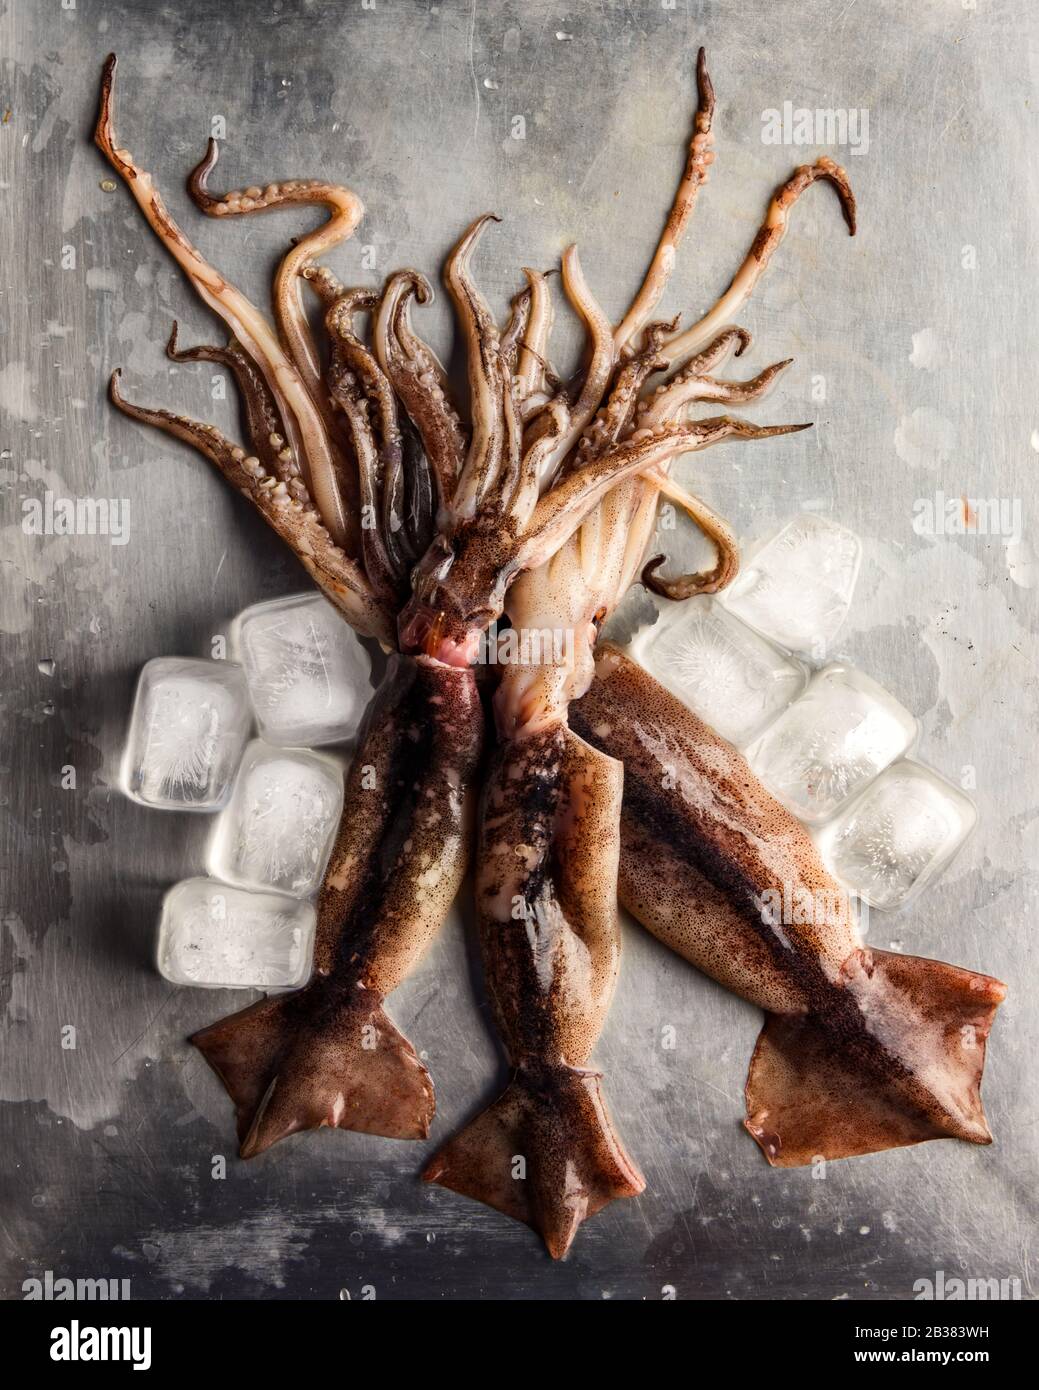 Raw squid with ice cubes on steel plate. Seafood ingredient. Food photography Stock Photo